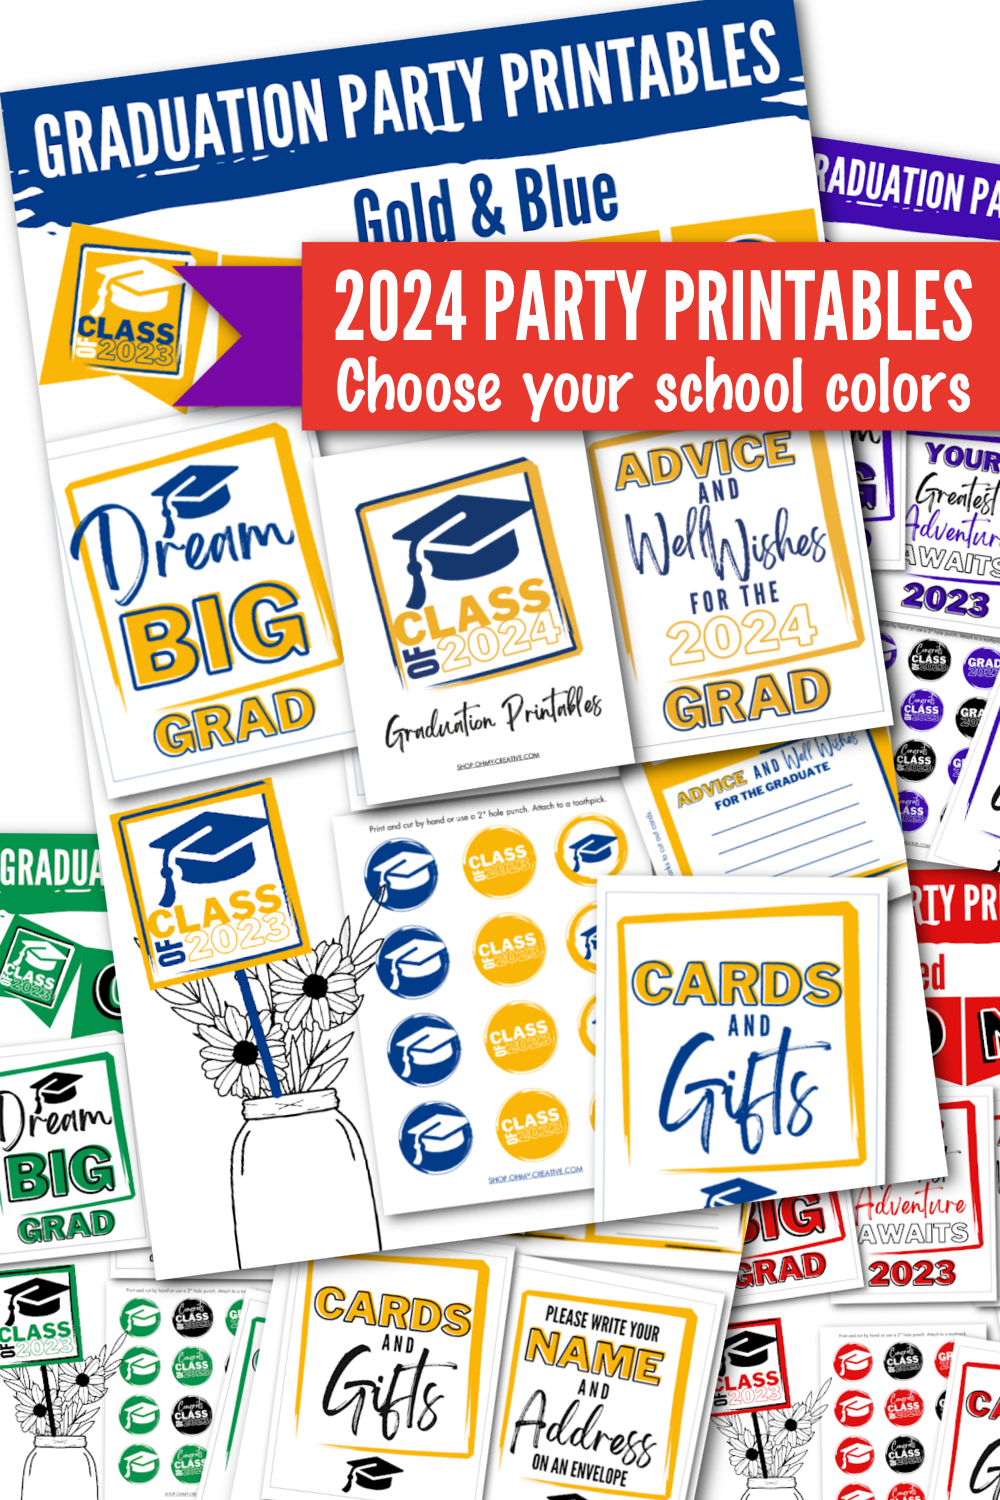 Create the perfect graduation party with these graduation party printable decorations. Including a "Congratulations" banner, graduation quote signs, graduation centerpiece printables, Grad party candy bar signs and more! Grad party decorations in school colors. Use them for high school grad party or college graduation party!